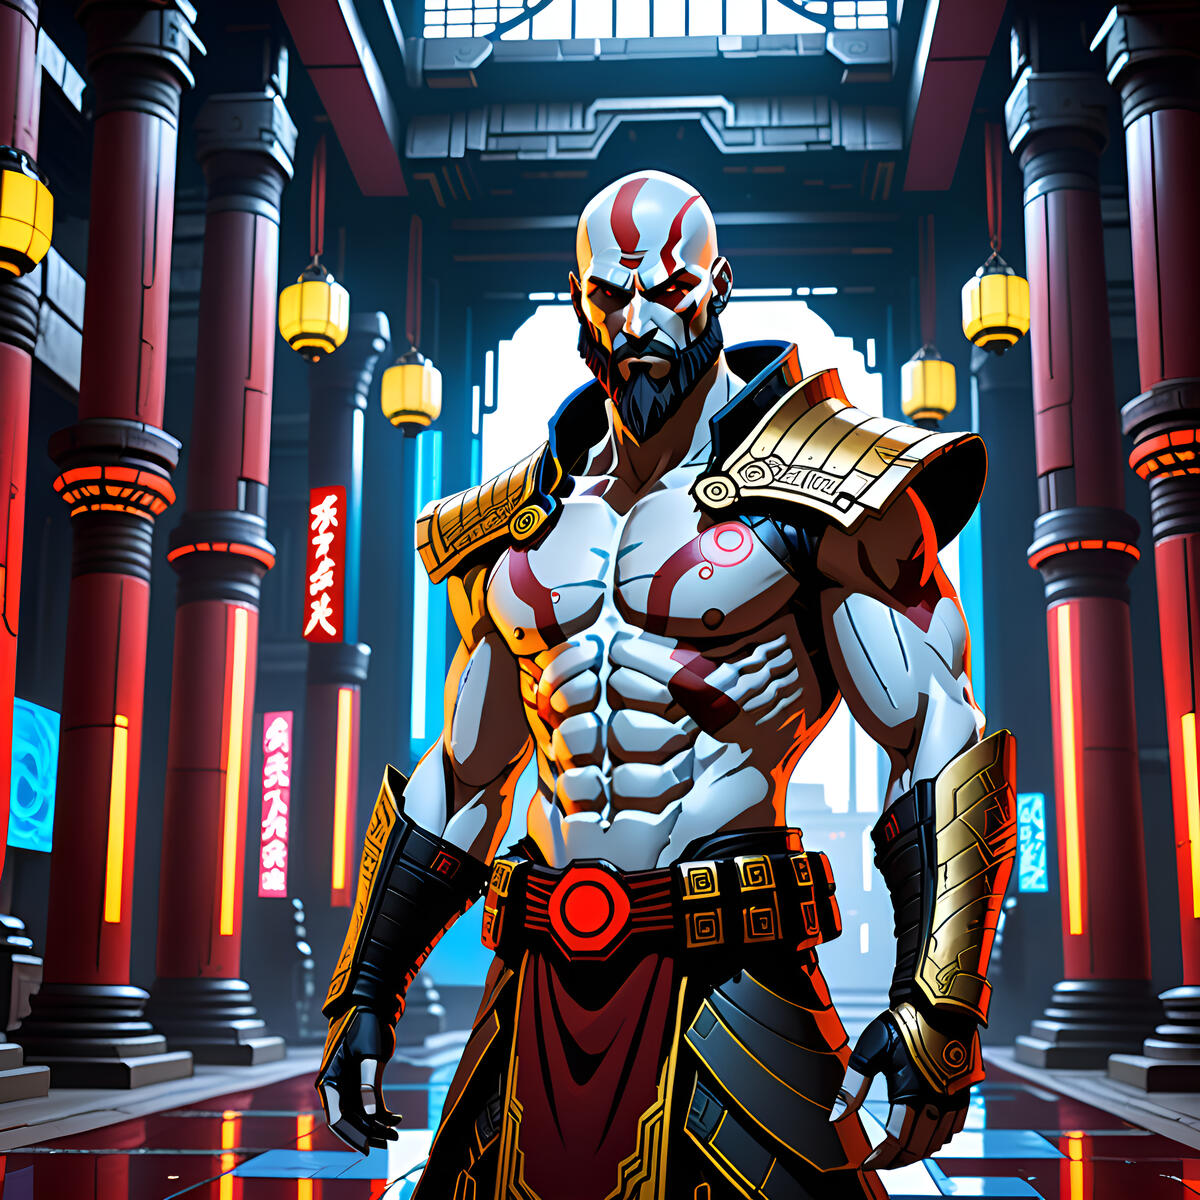 Kratos in the temple